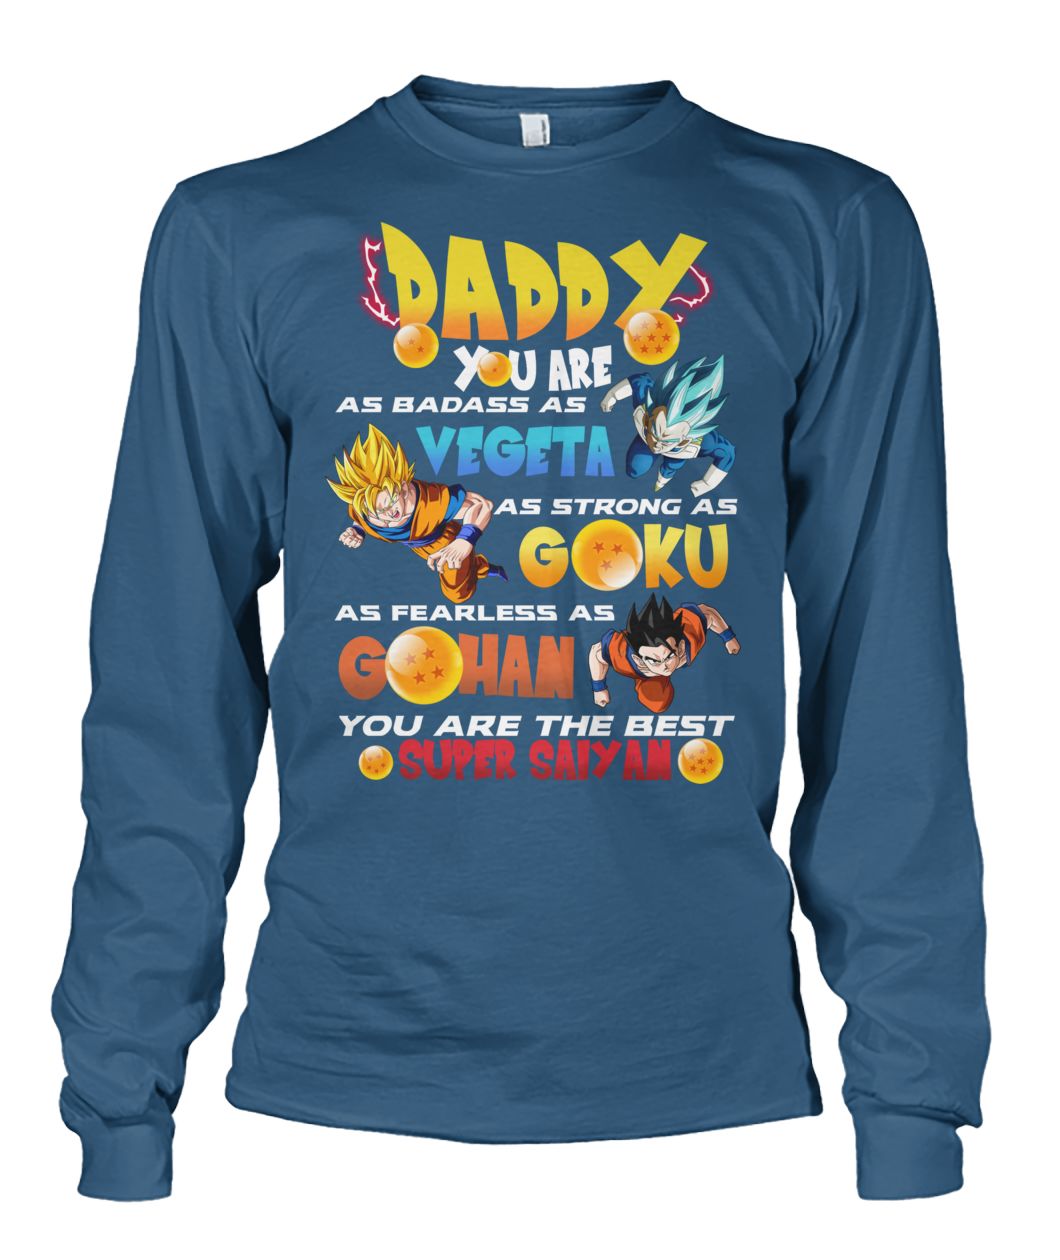 Daddy you are as badass as vegeta as strong as goku as fearless as gohan you are the best super saiyan unisex long sleeve